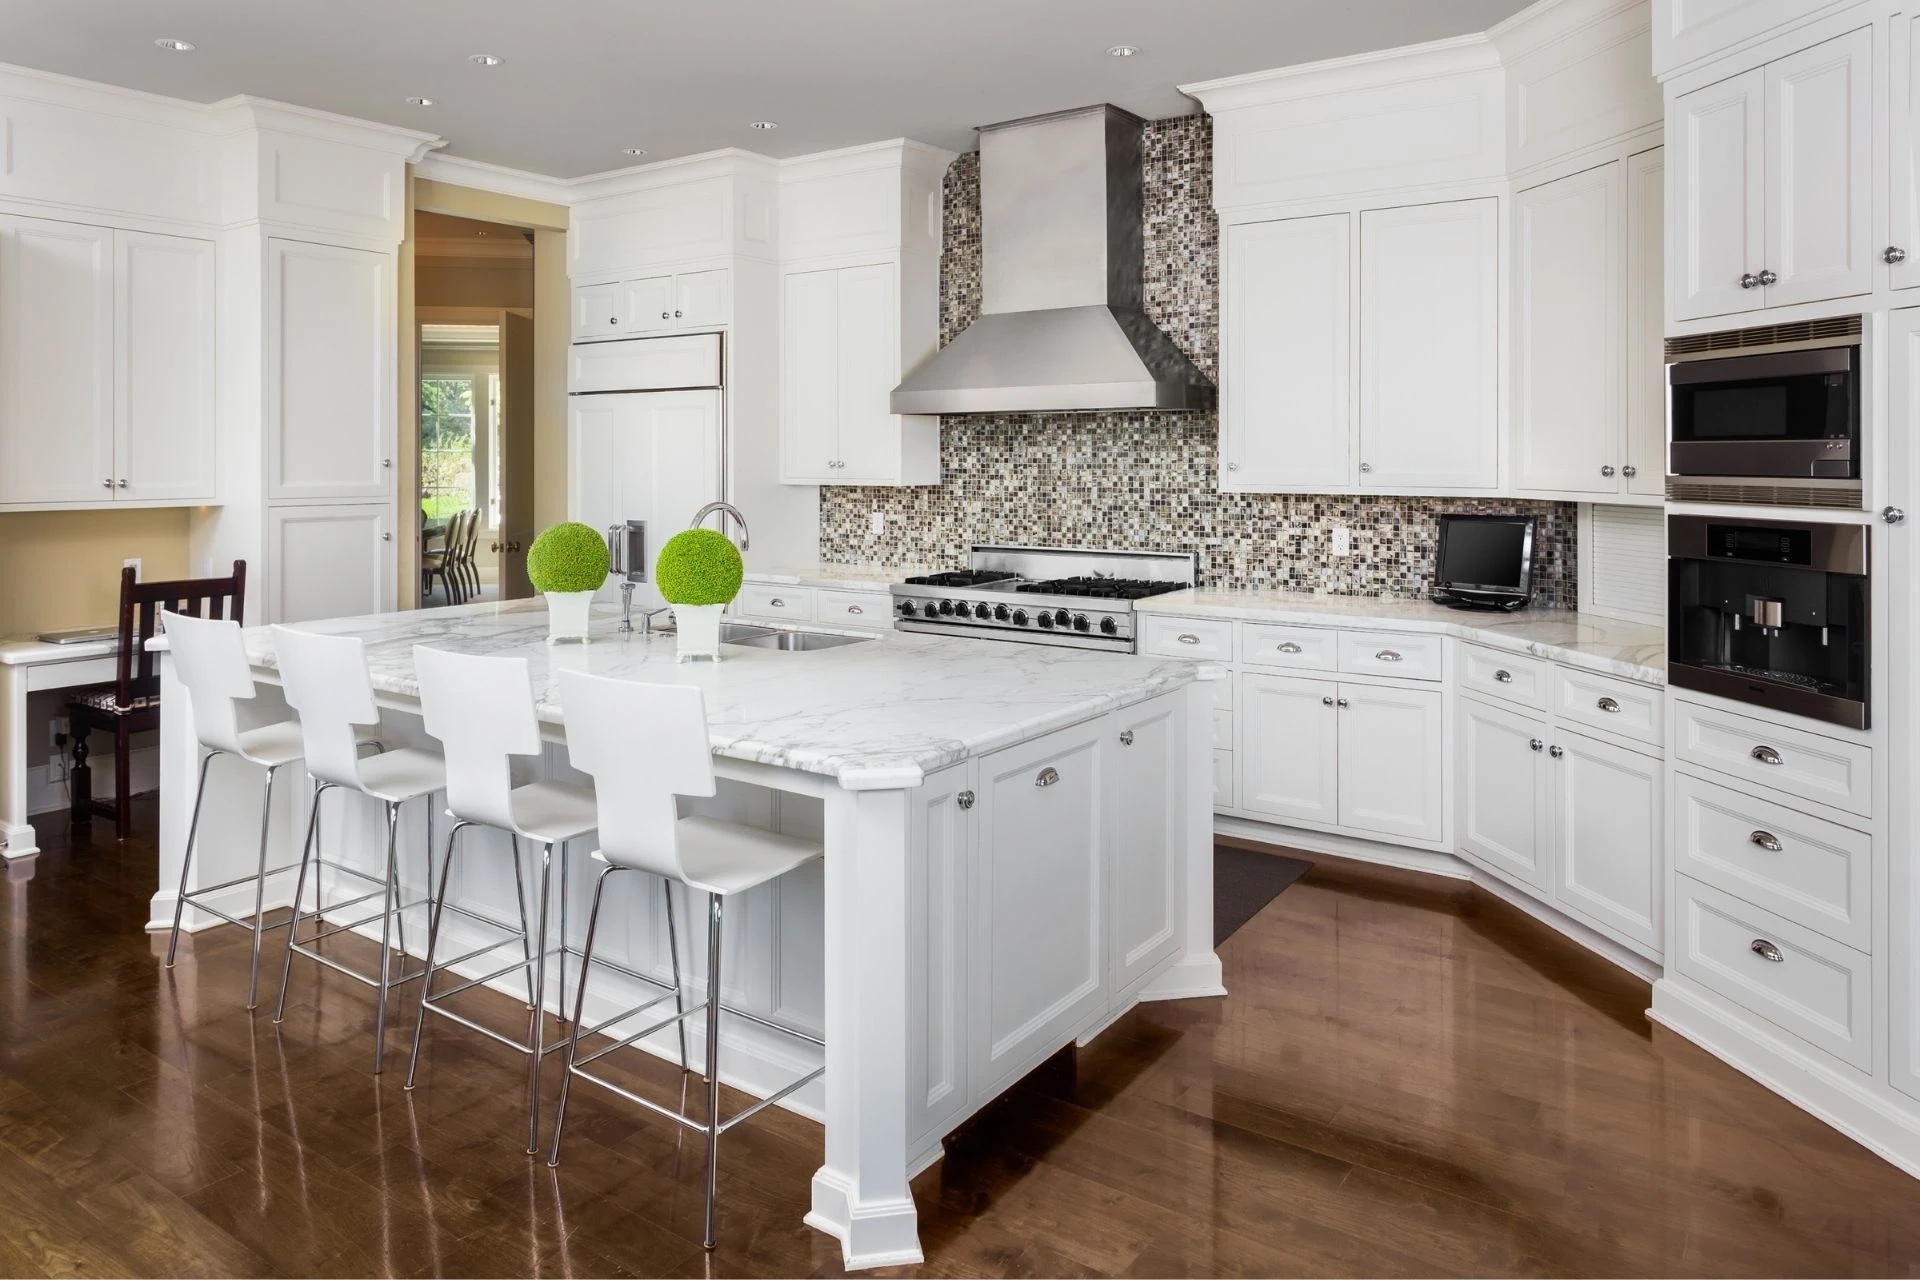 How Much Does a Kitchen Remodel in South Florida Cost